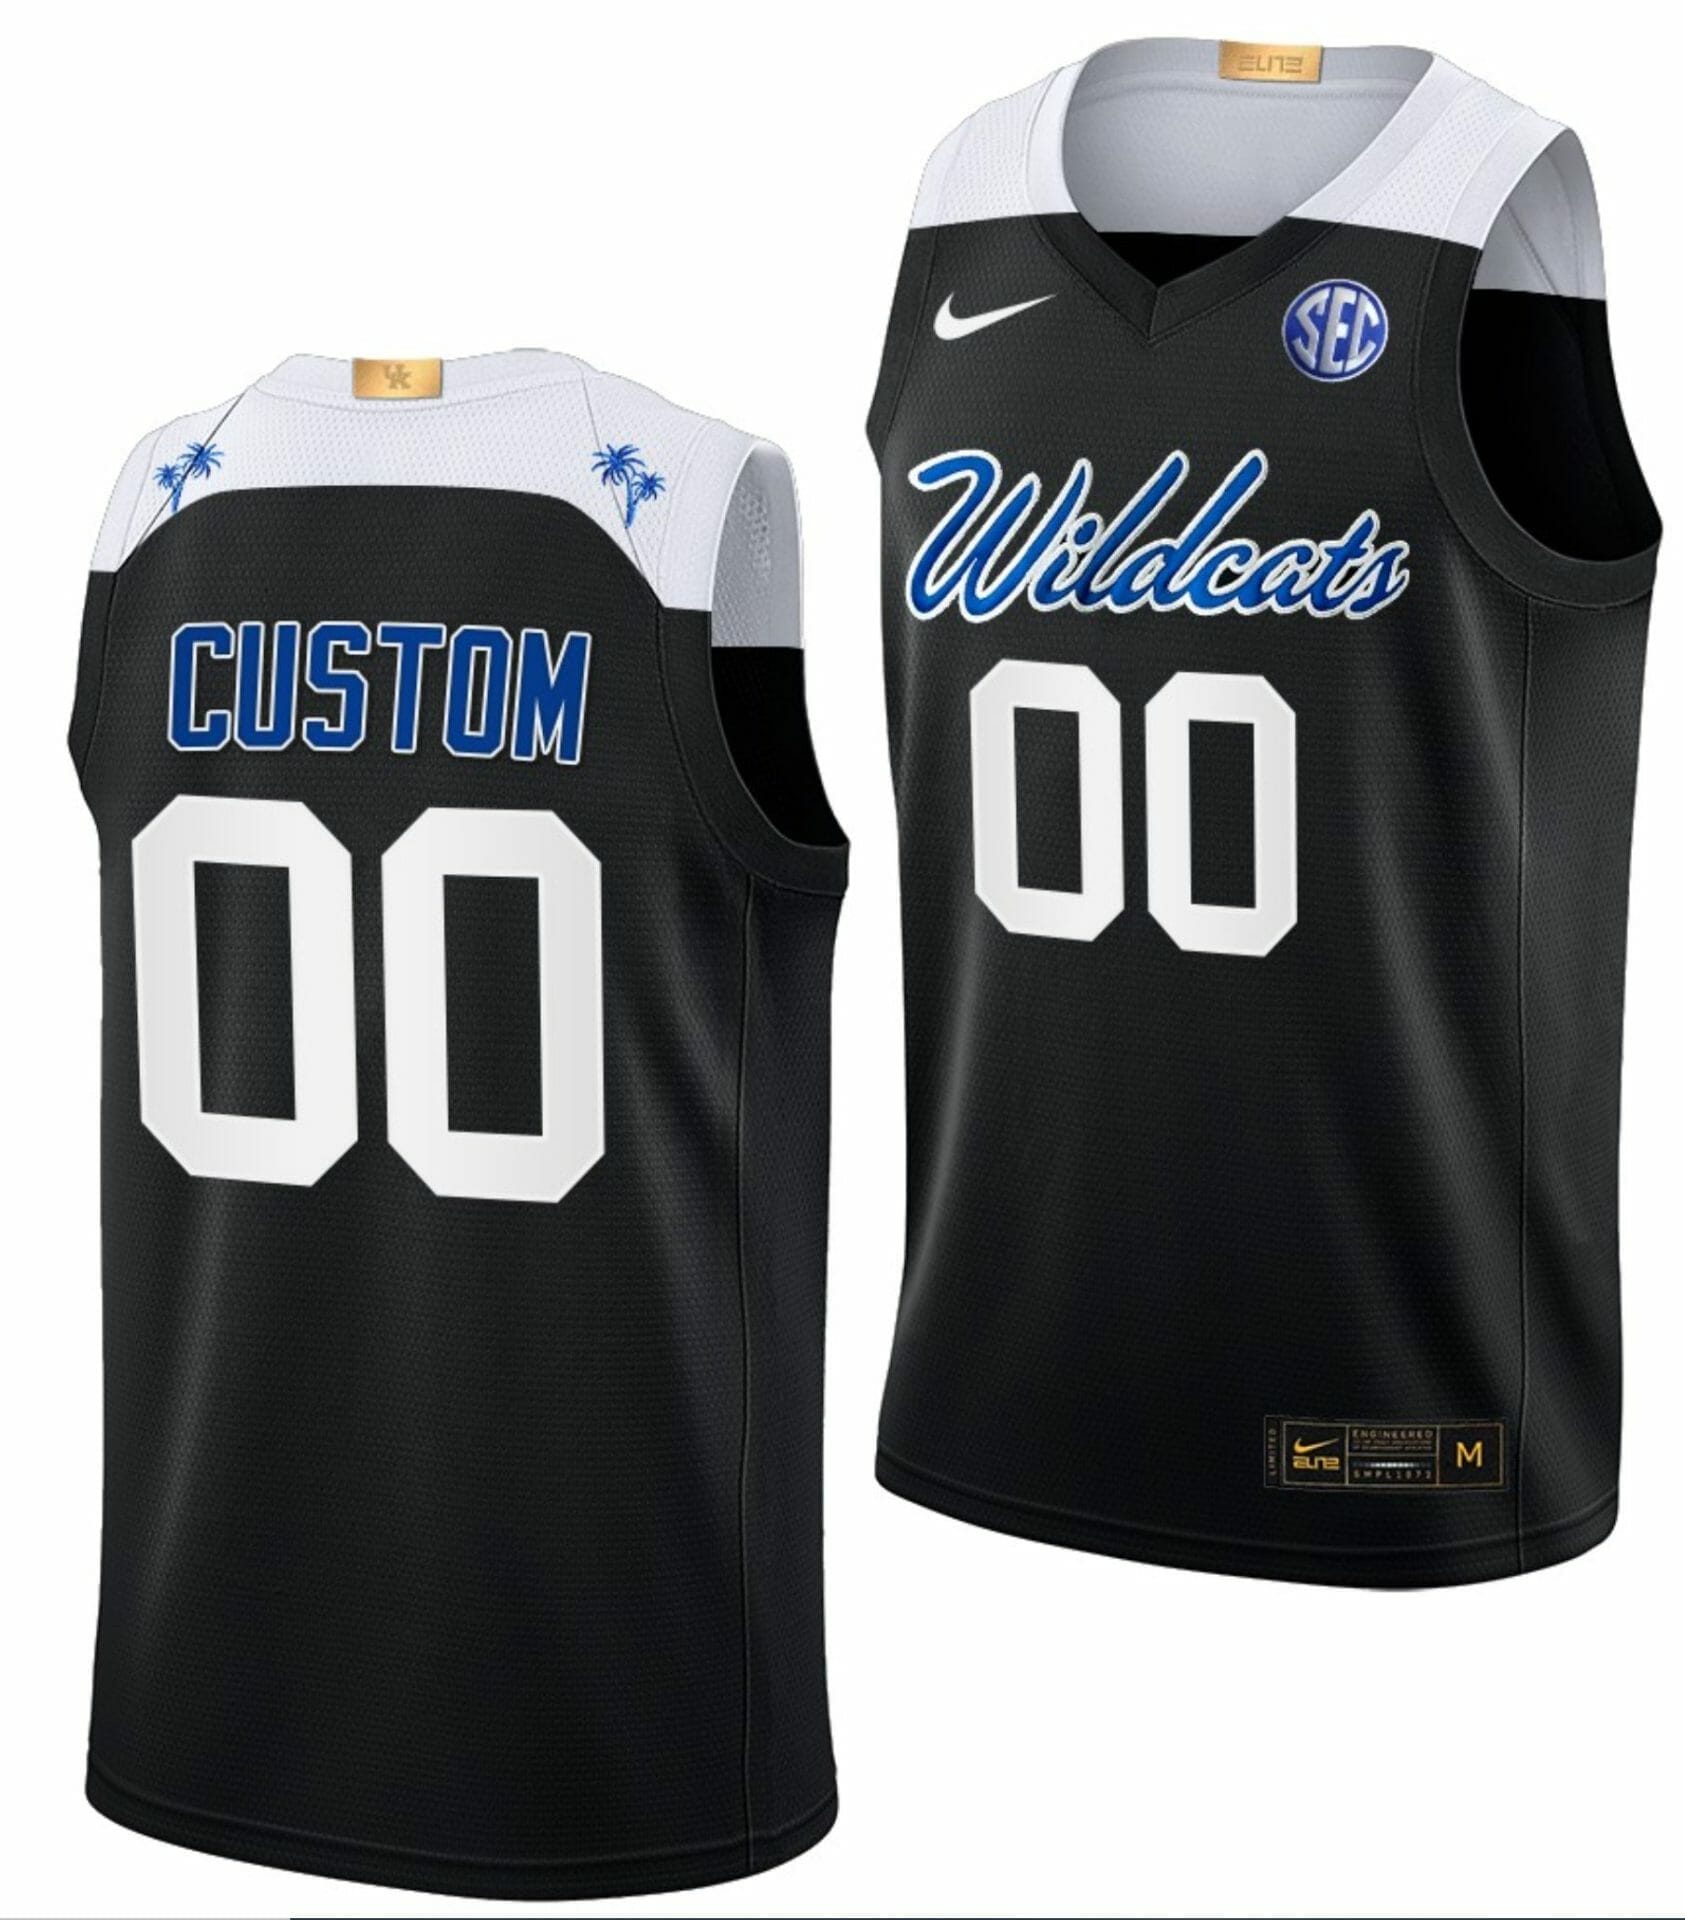 Custom College Basketball Jerseys Houston Cougars Jersey Name and Number White